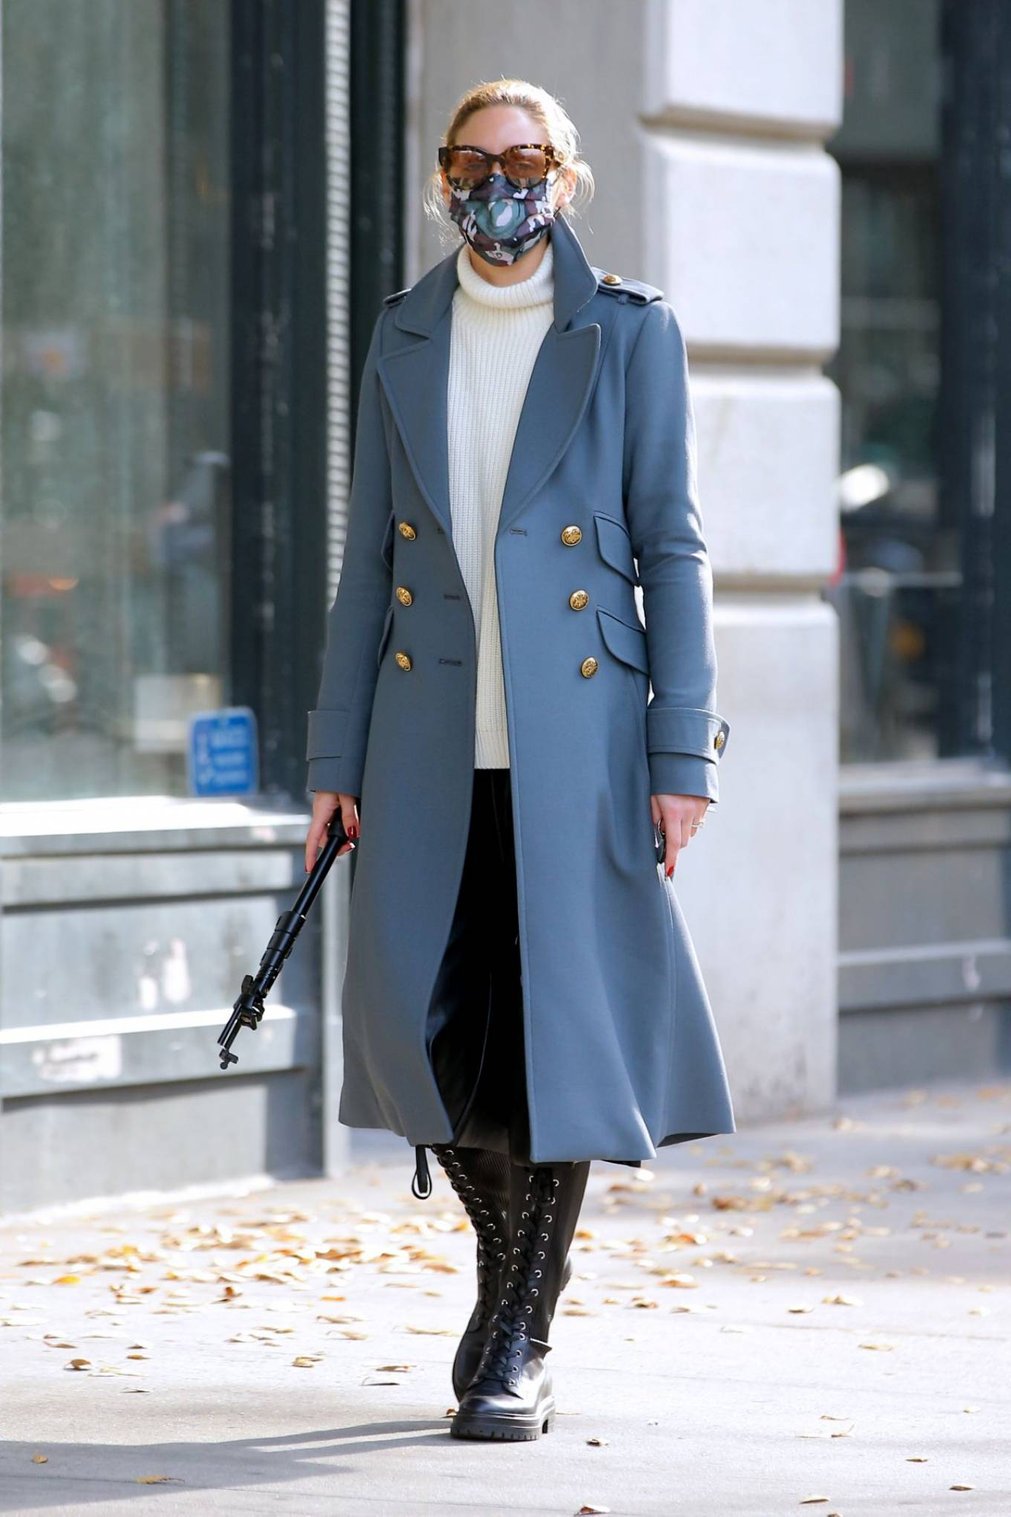 Olivia Palermo 2020 : Olivia Palermo – Out for a stroll in NYC-01